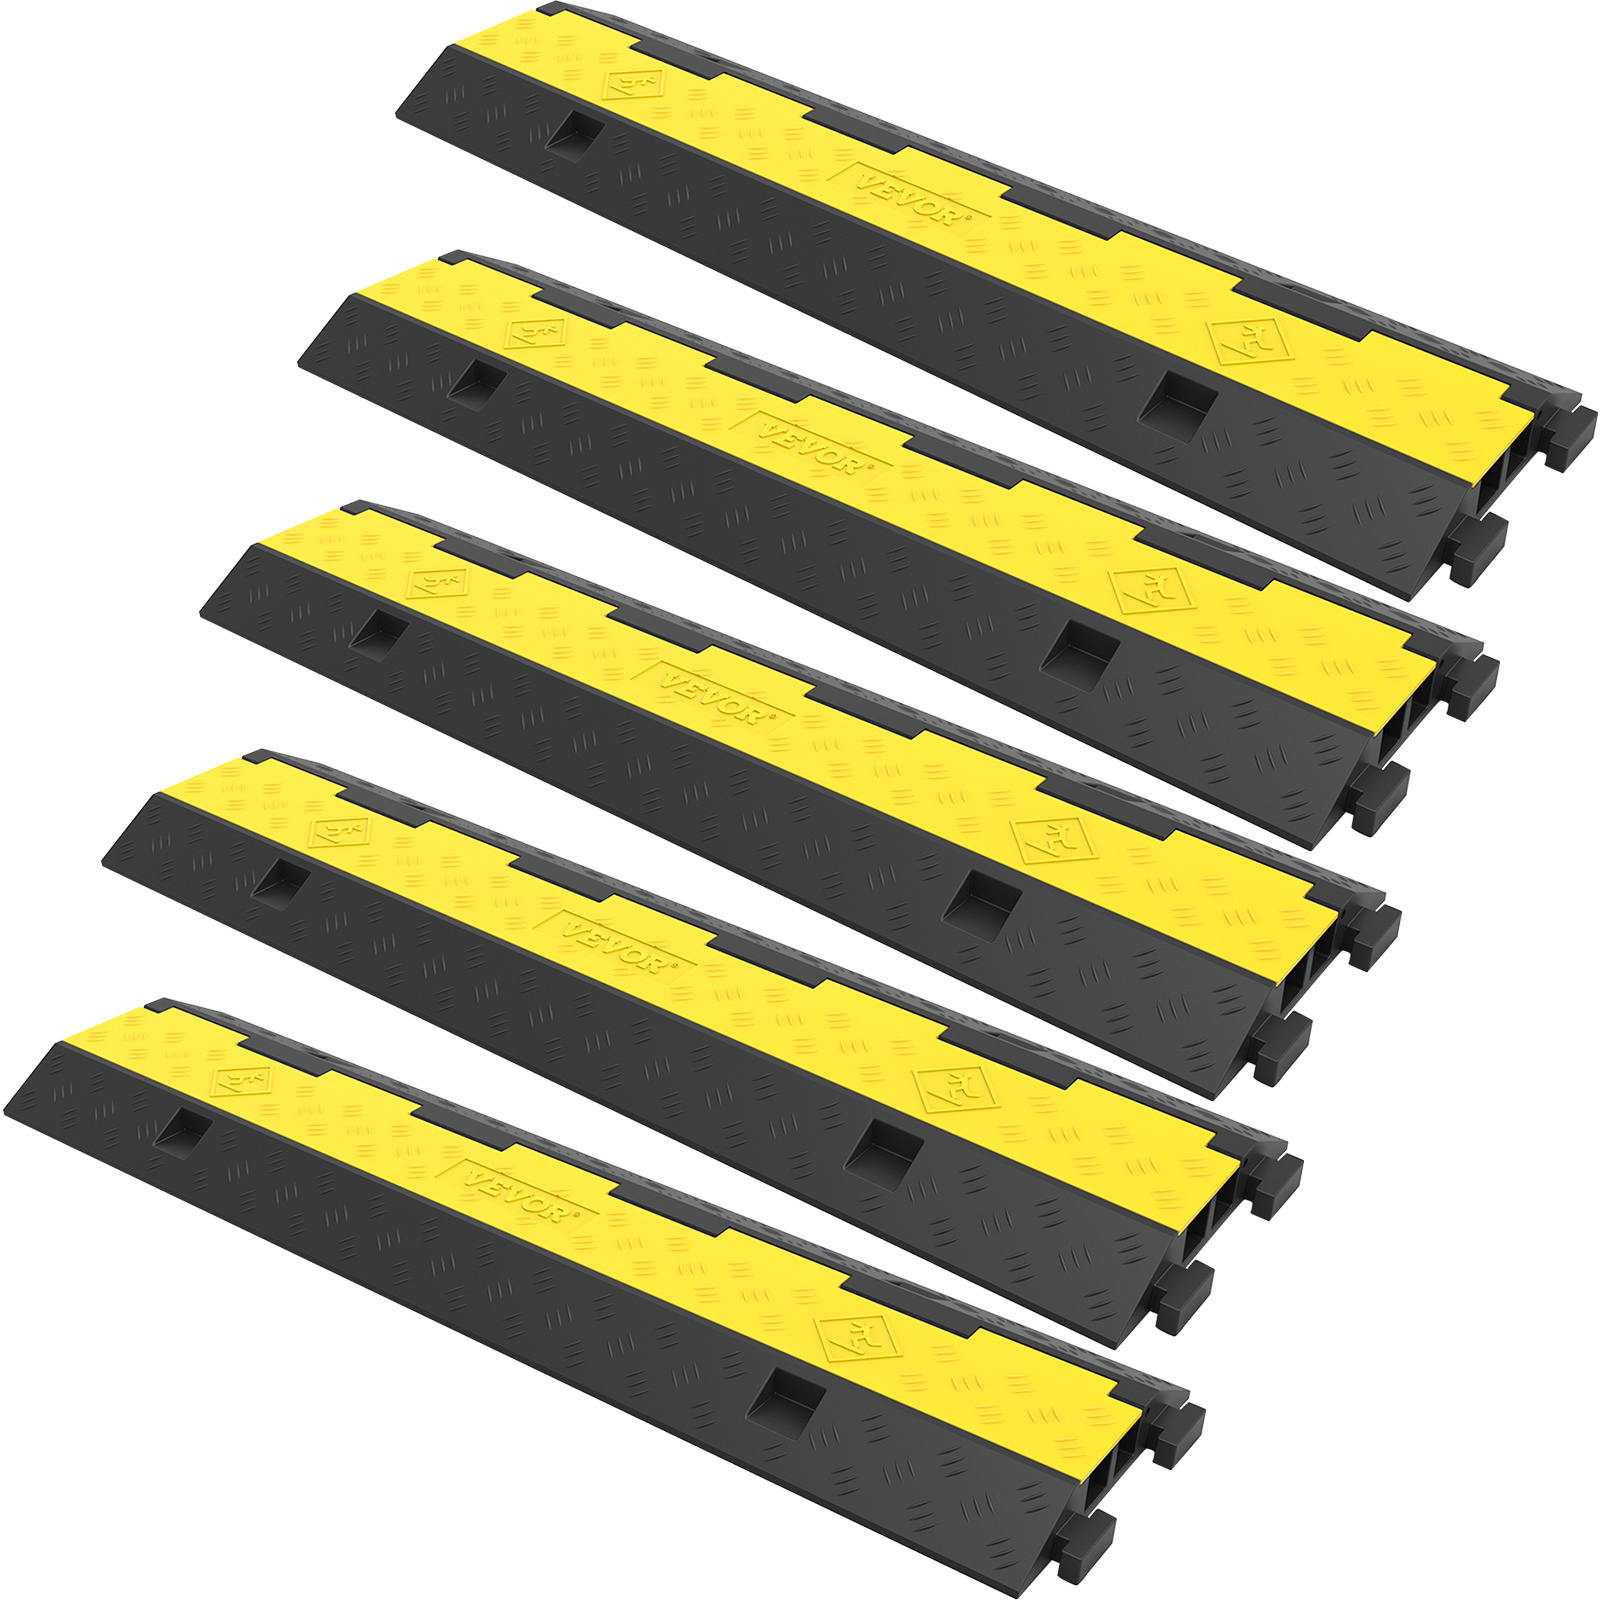 Rubber Cable Ramp,11000 Loading,4 Pack 2 Channels